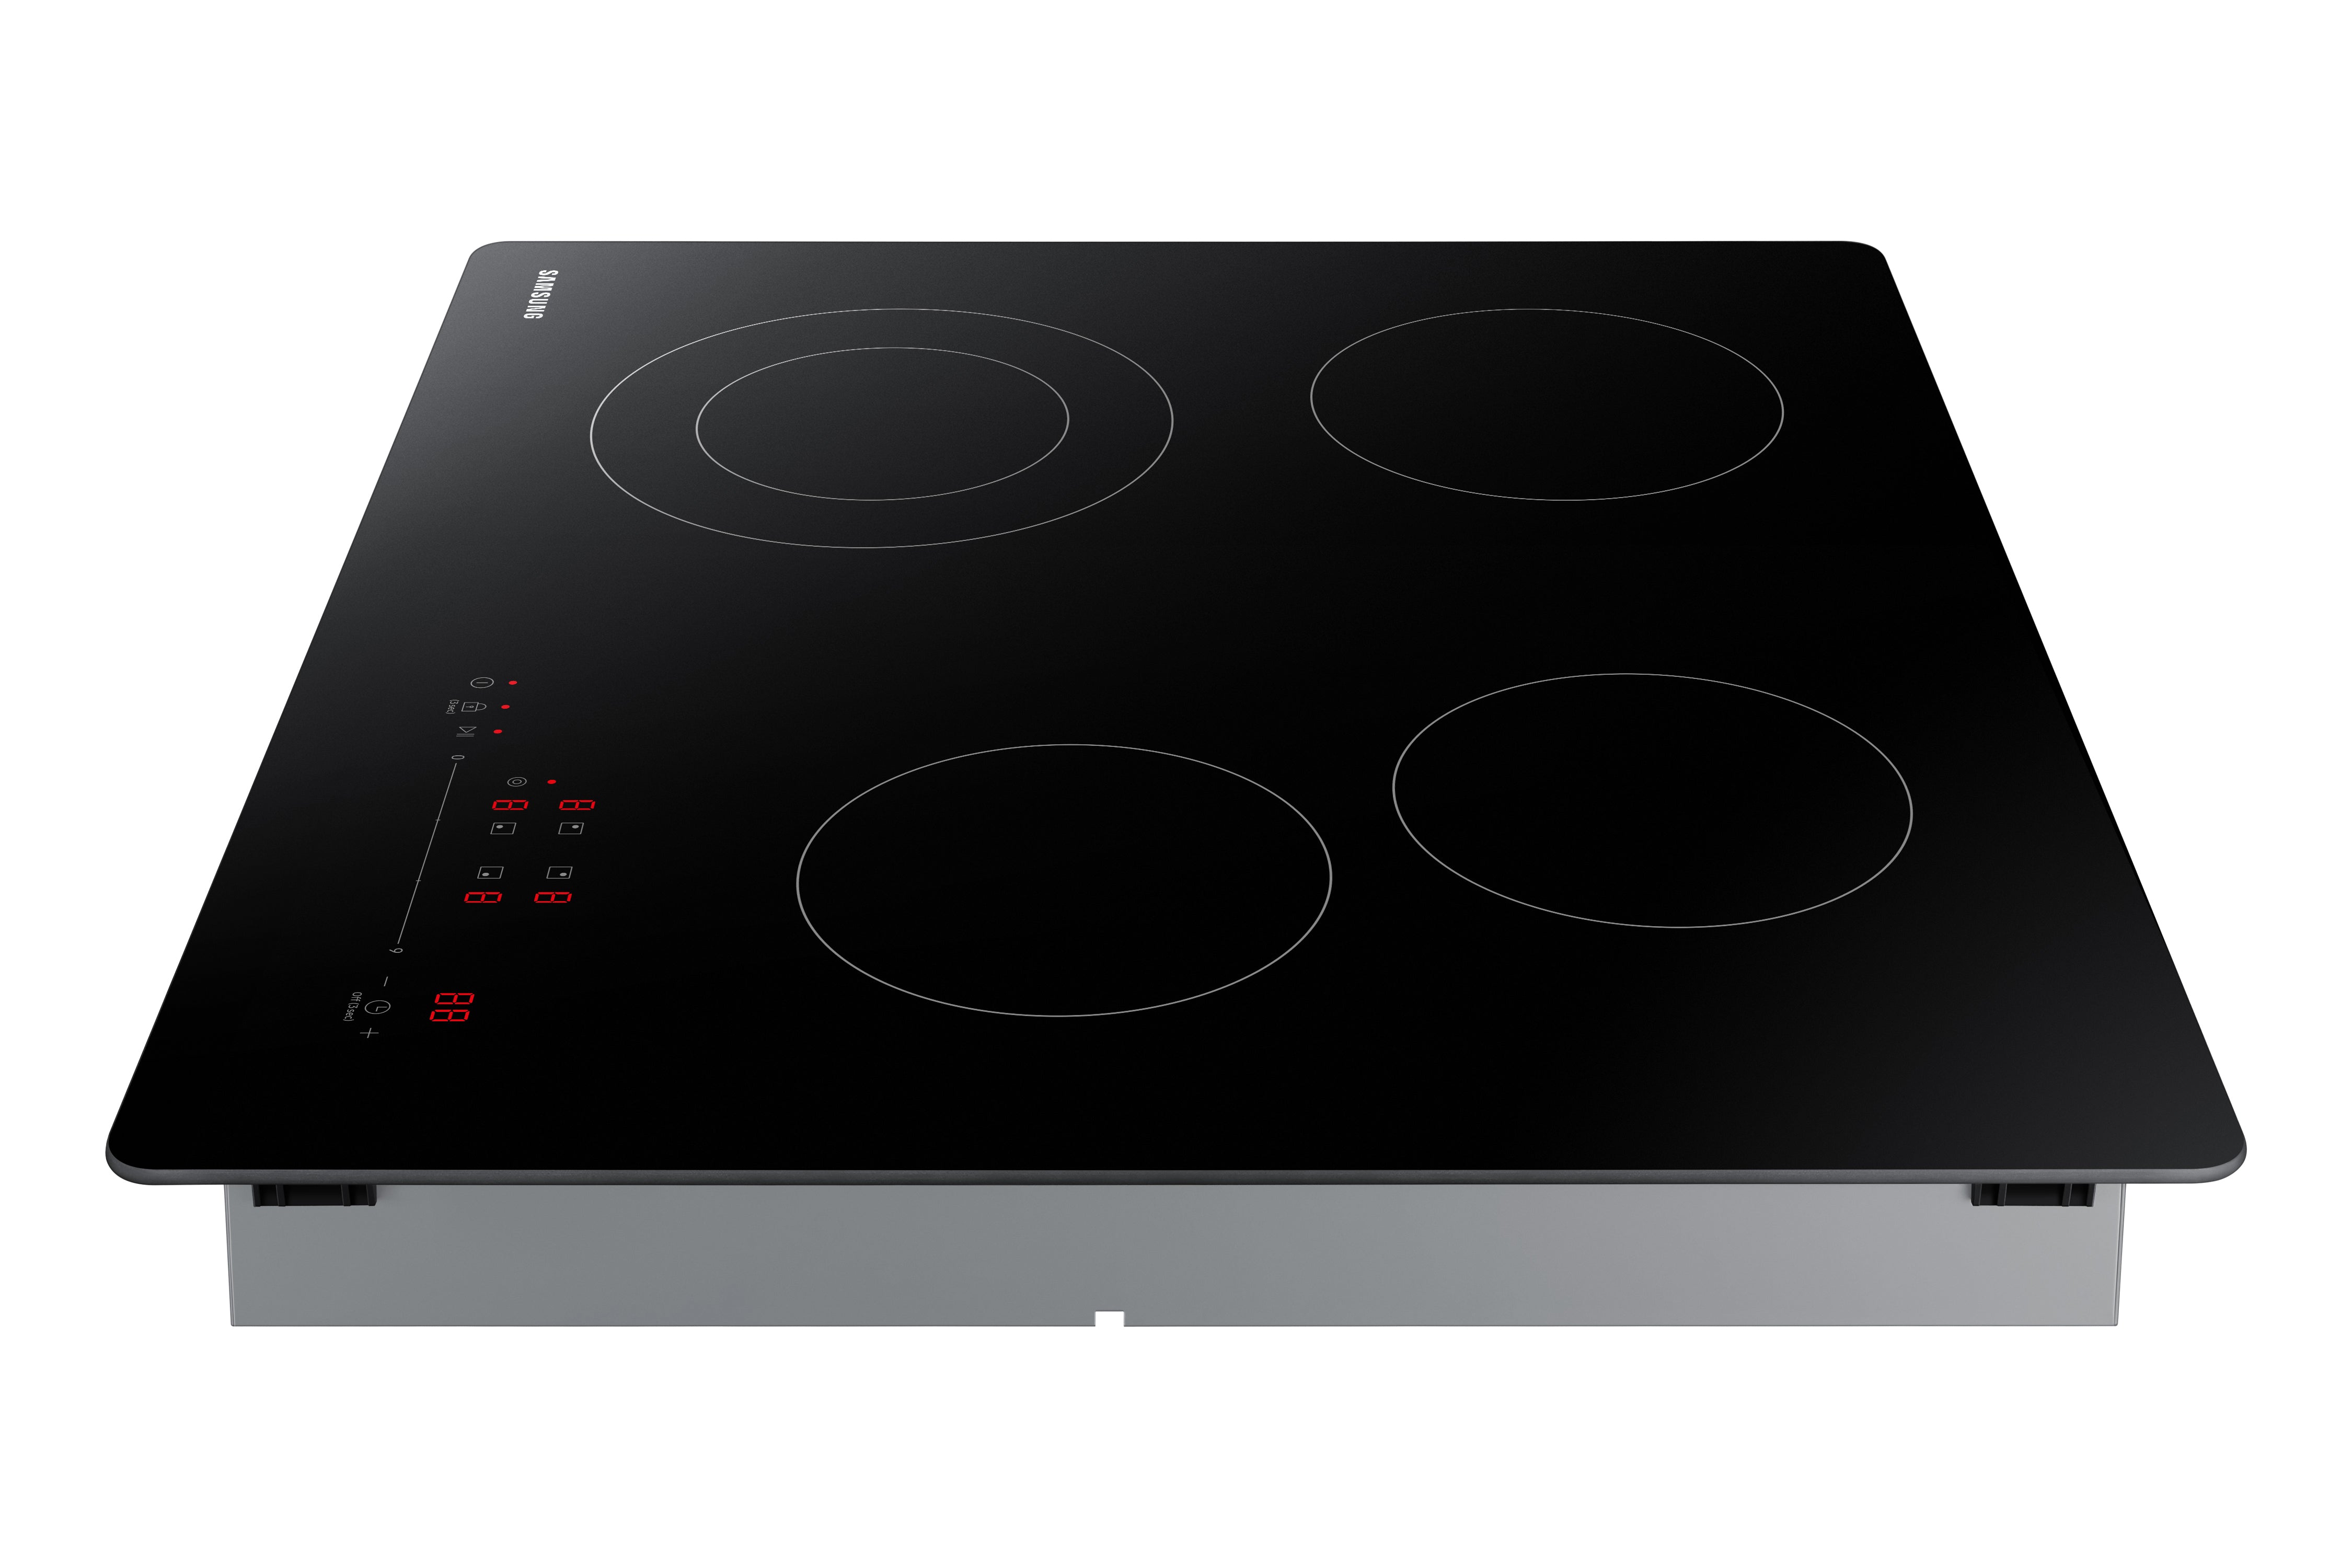 Samsung - 23.6 inch wide Electric Cooktop in Black - NZ24T4360RK